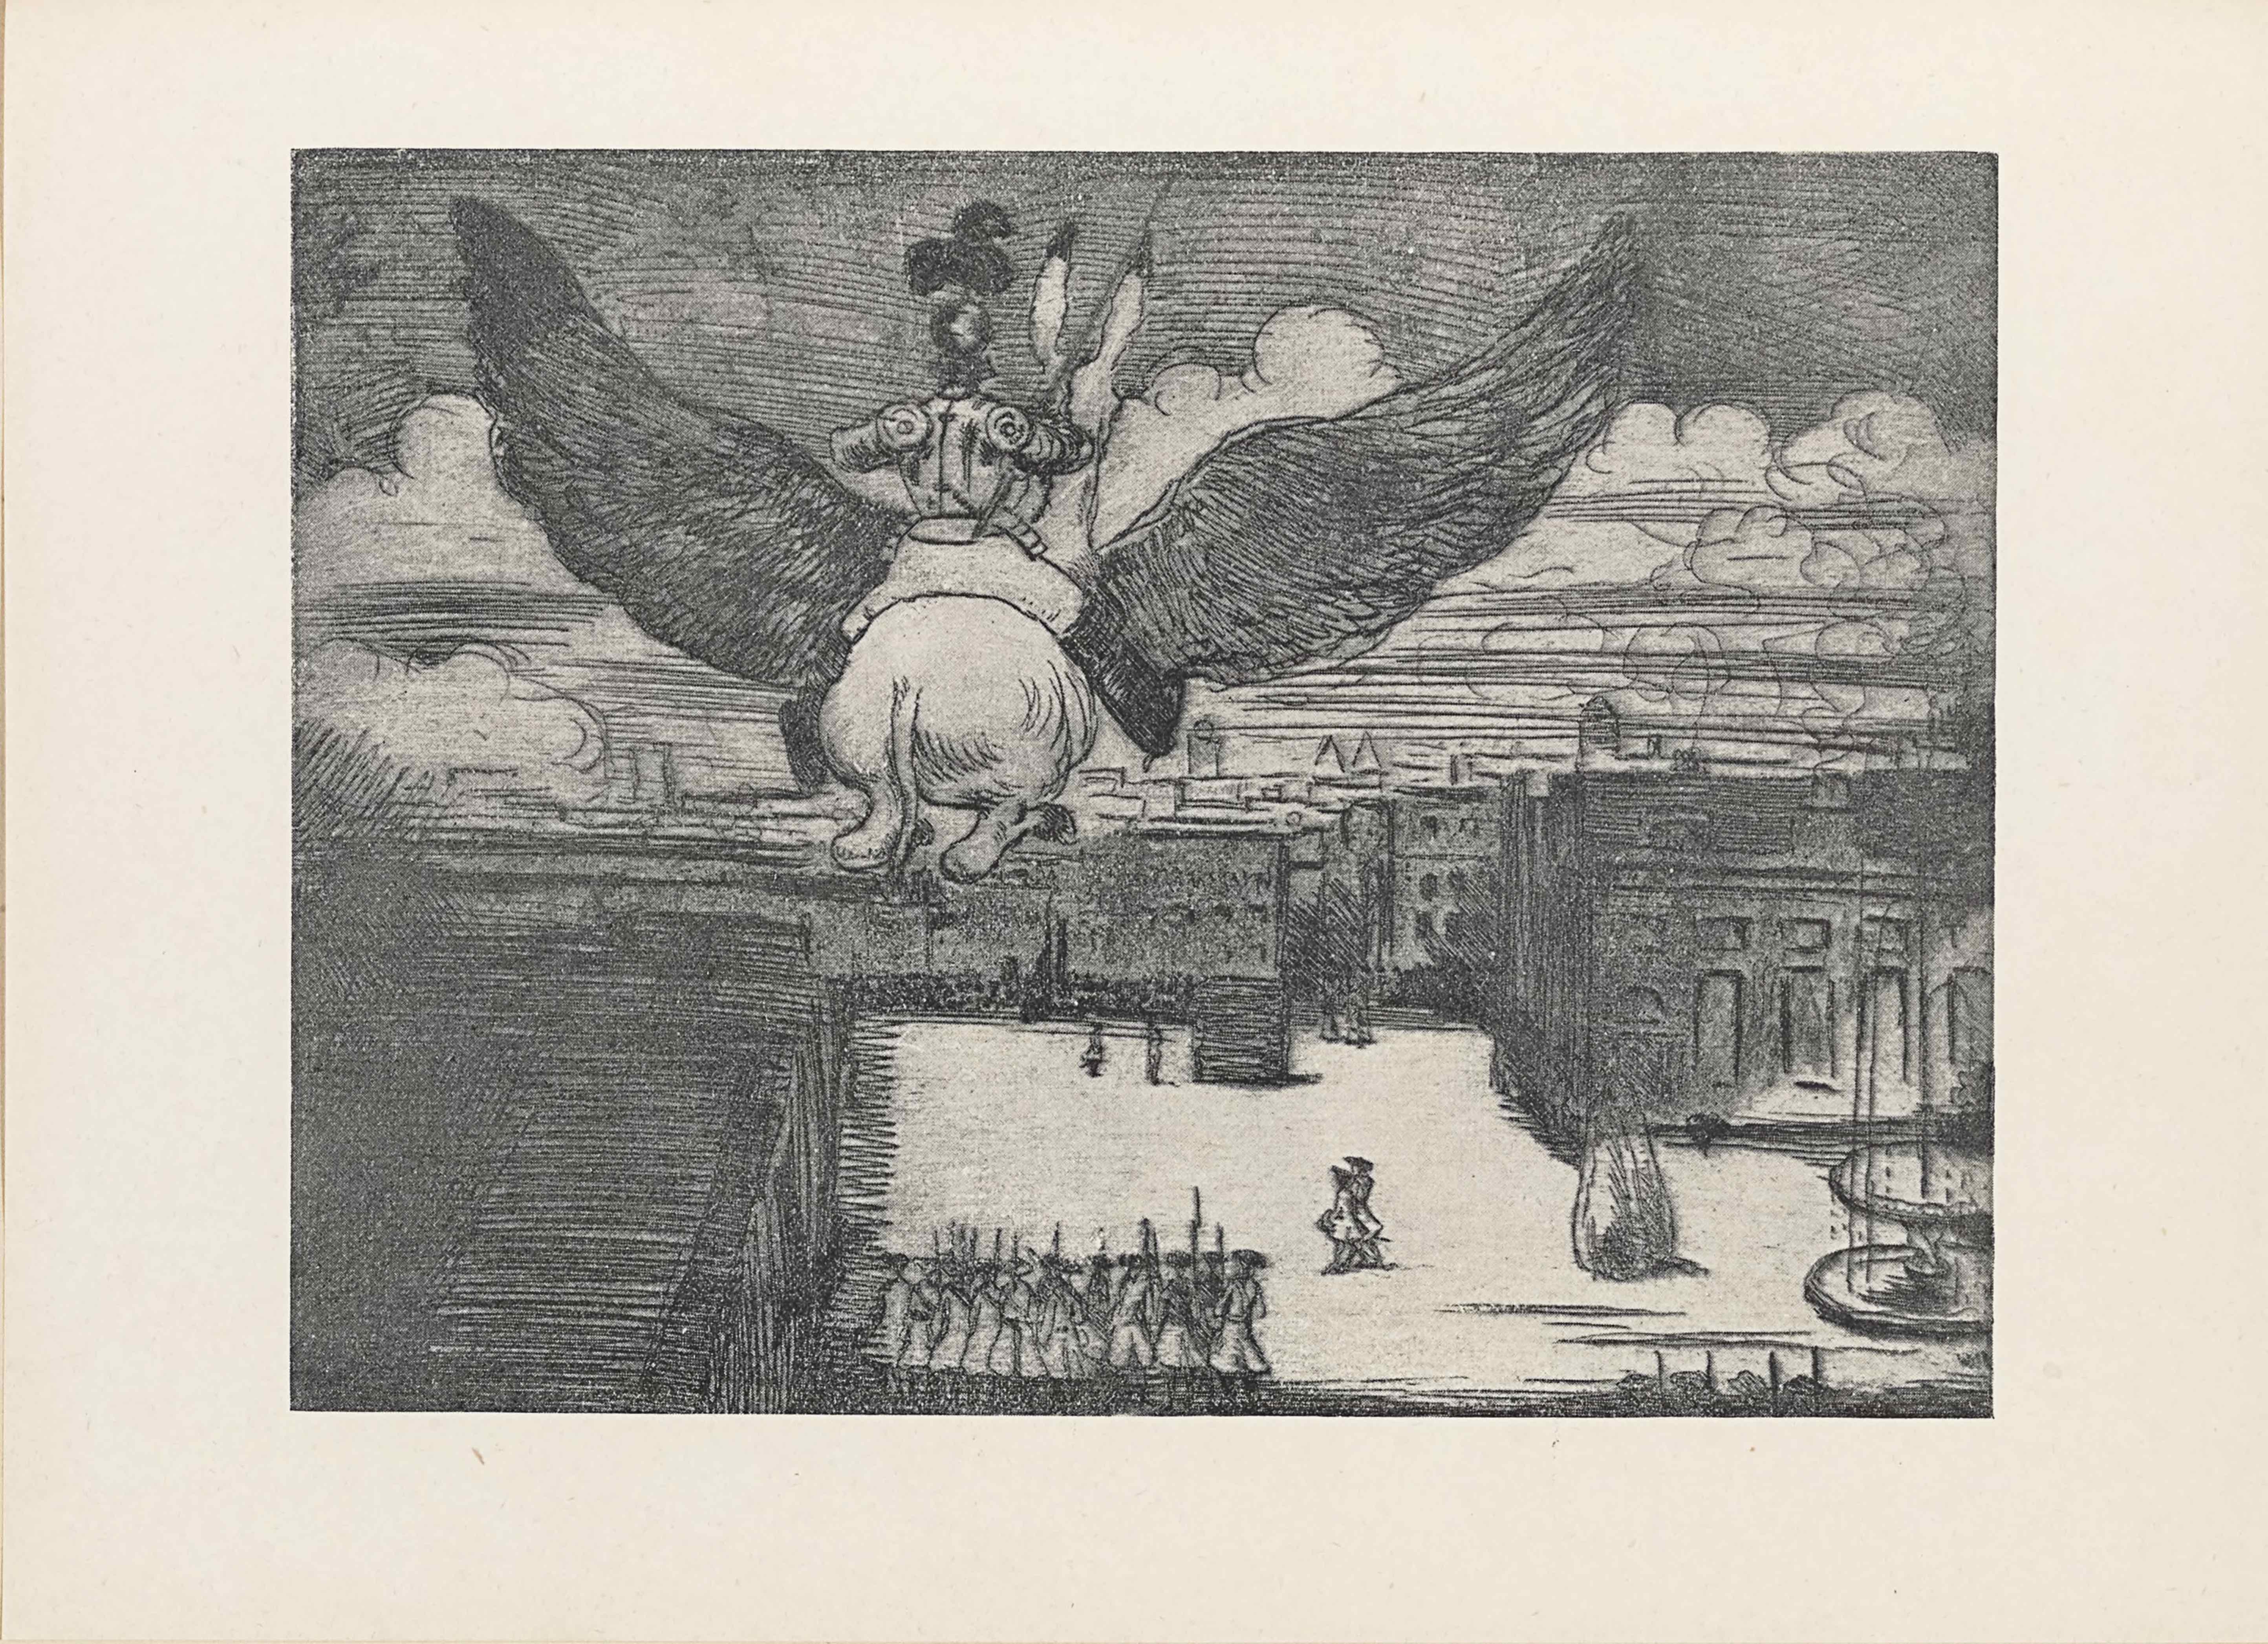 The half-tone reproduction of an etching is in landscape orientation. The image shows a flying donkey being ridden by a man in armour up in the air and over a guarded town square. In the top half of the page the flying donkey and armoured man are foregrounded and slightly to the left. The donkey and man are facing away from the viewer, and the donkey’s backend is central. The donkey’s legs are folded up towards his stomach and his tail hangs long behind him. He has wings attached to his sides that span three-quarters of the page in width. The wings are feathered and alike eagle wings that arc upwards. The man sitting on the donkey has one leg hanging over either side of the donkey’s body and is wearing knee-high boots with pants. On the man’s top half he wears armour that covers his torso, shoulder, arms, and head: specifically a tasset, fauld, plackart, breastplate, pauldron, rerebrace, couter, vambrace, gauntlet, gorget, helm, and largely plumed comb. The knight also holds a long spear vertically tucked under his right arm. The donkey’s tall ears are tipped in black and stick out from behind the man. They are flying above a backgrounded city that fills the bottom half of the page. In the bottom left corner is the roof of a large building. In the central bottom of the page there are about ten men standing in a row within the town square surrounded by two-storey buildings. The group of men are facing away from the viewer and dressed in robes with a soldier cap and a bayonet hung on a sash across their torsos. To the right of the group are two soldiers similarly dressed to the others and walking diagonally and towards the left away from the pack. In the bottom right corner is a large stone slab, perhaps a monument, and to the right of it sits a fountain. Behind the fountain is a large building that rises up to the skyline. To the left of that building and set deeper into the background is a group of buildings that meld into one another and form the far side of the town square. The roofs of the buildings in the distance have many chimneys and smoke plumes out of them into the cloudy sky above. In about the middle of the square is a large box taller than the two men standing to the left of it dressed in the same soldier clothing as the rest of the soldiers. Against the wall of the buildings in the distance seems to be a large group of indiscriminate people watching what is happening at the box. It might be a hanging happening on the opposite side of the box, which is not visible to the viewer.